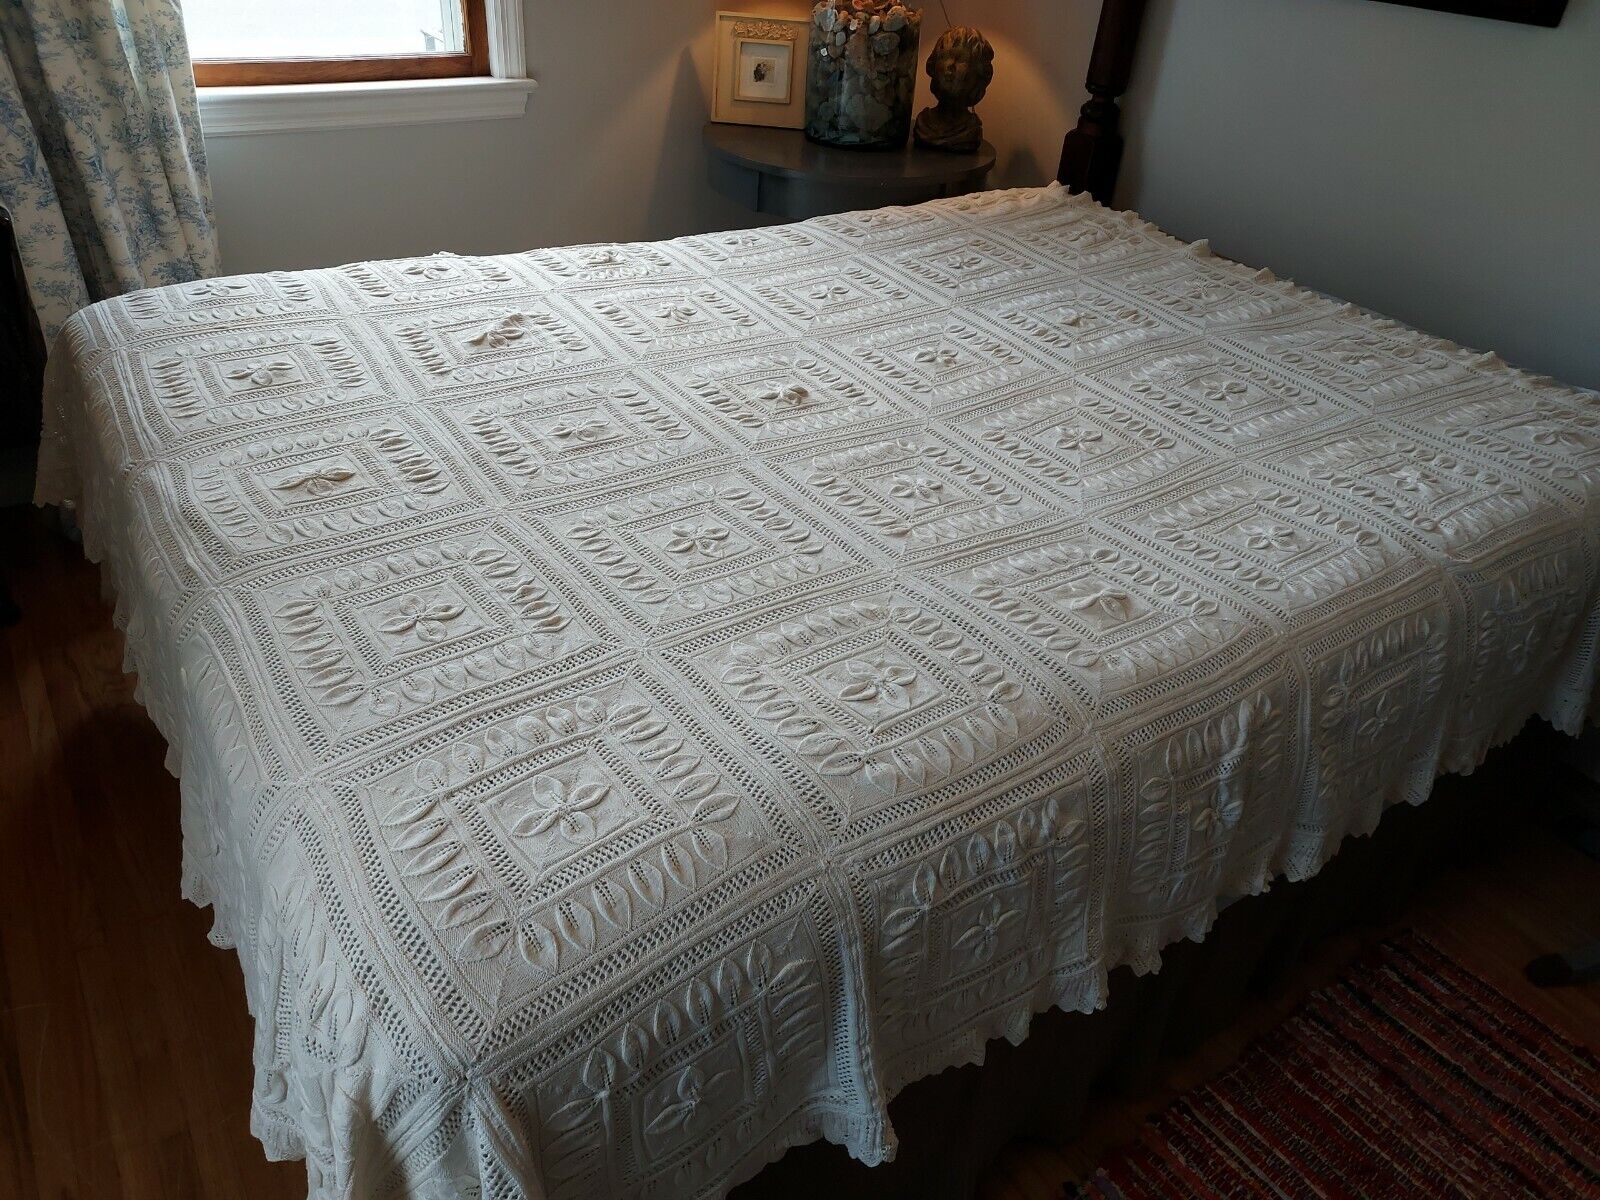 Antique Vtg w/ Provenance Hand Knit Knitted Bedspread Coverlet Queen pre-1900